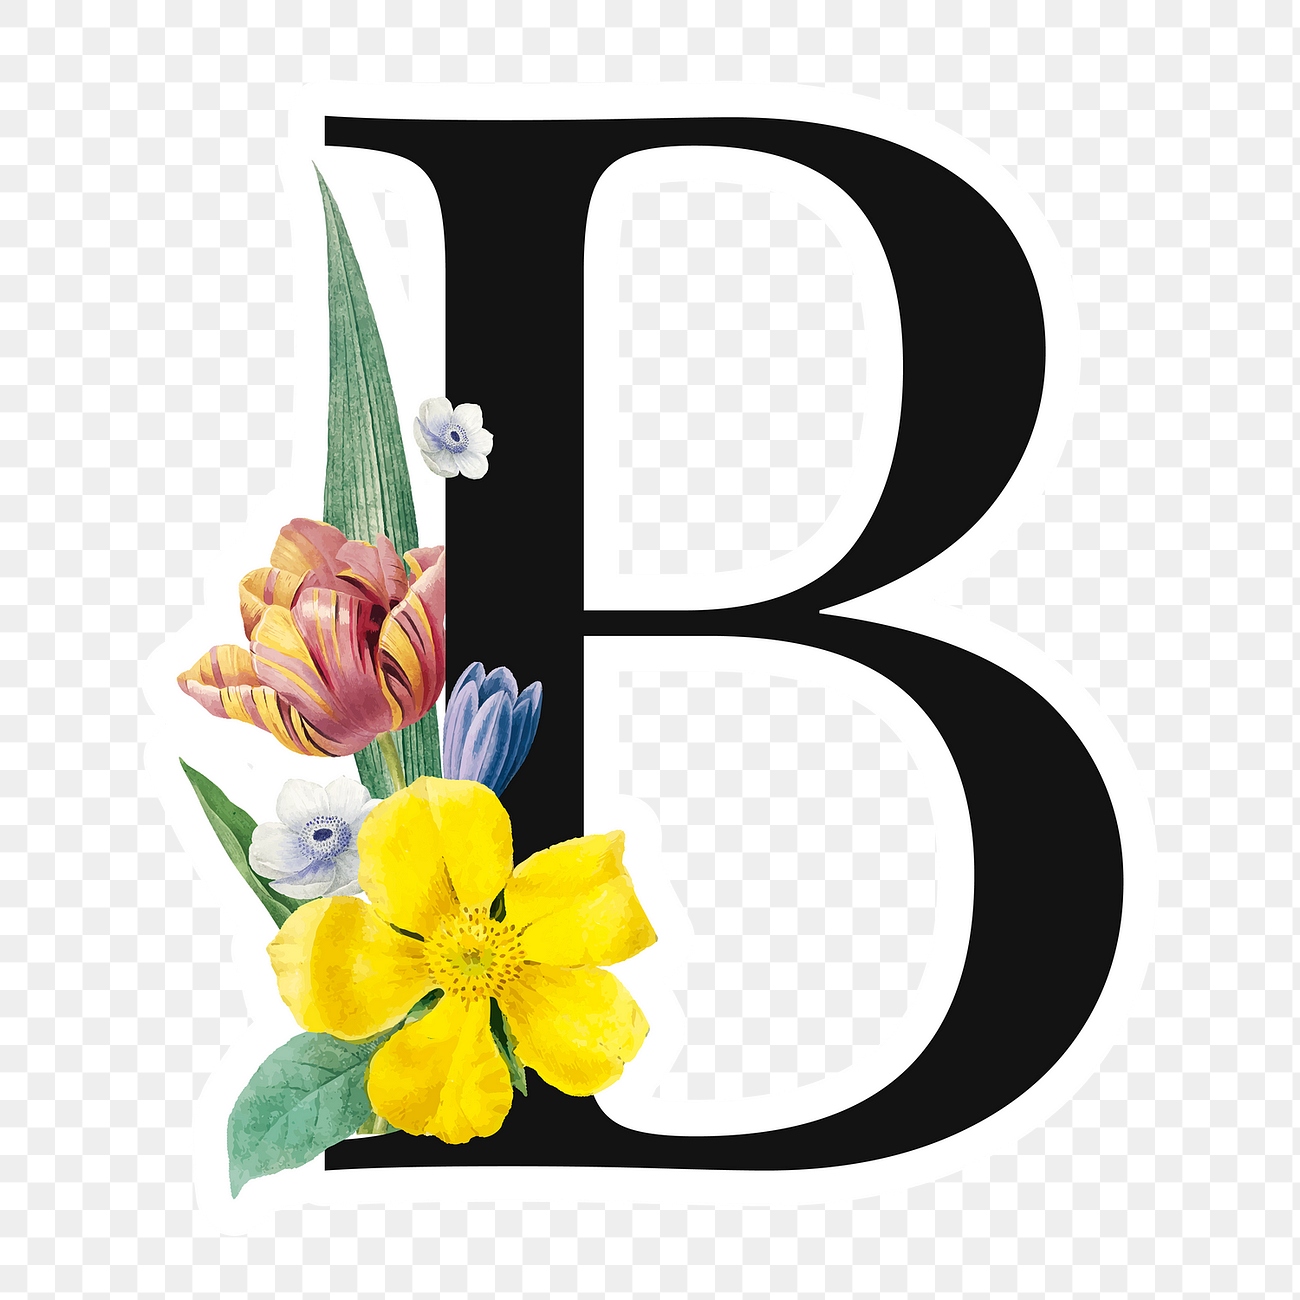 Flower decorated capital letter B | Premium PNG Sticker - rawpixel